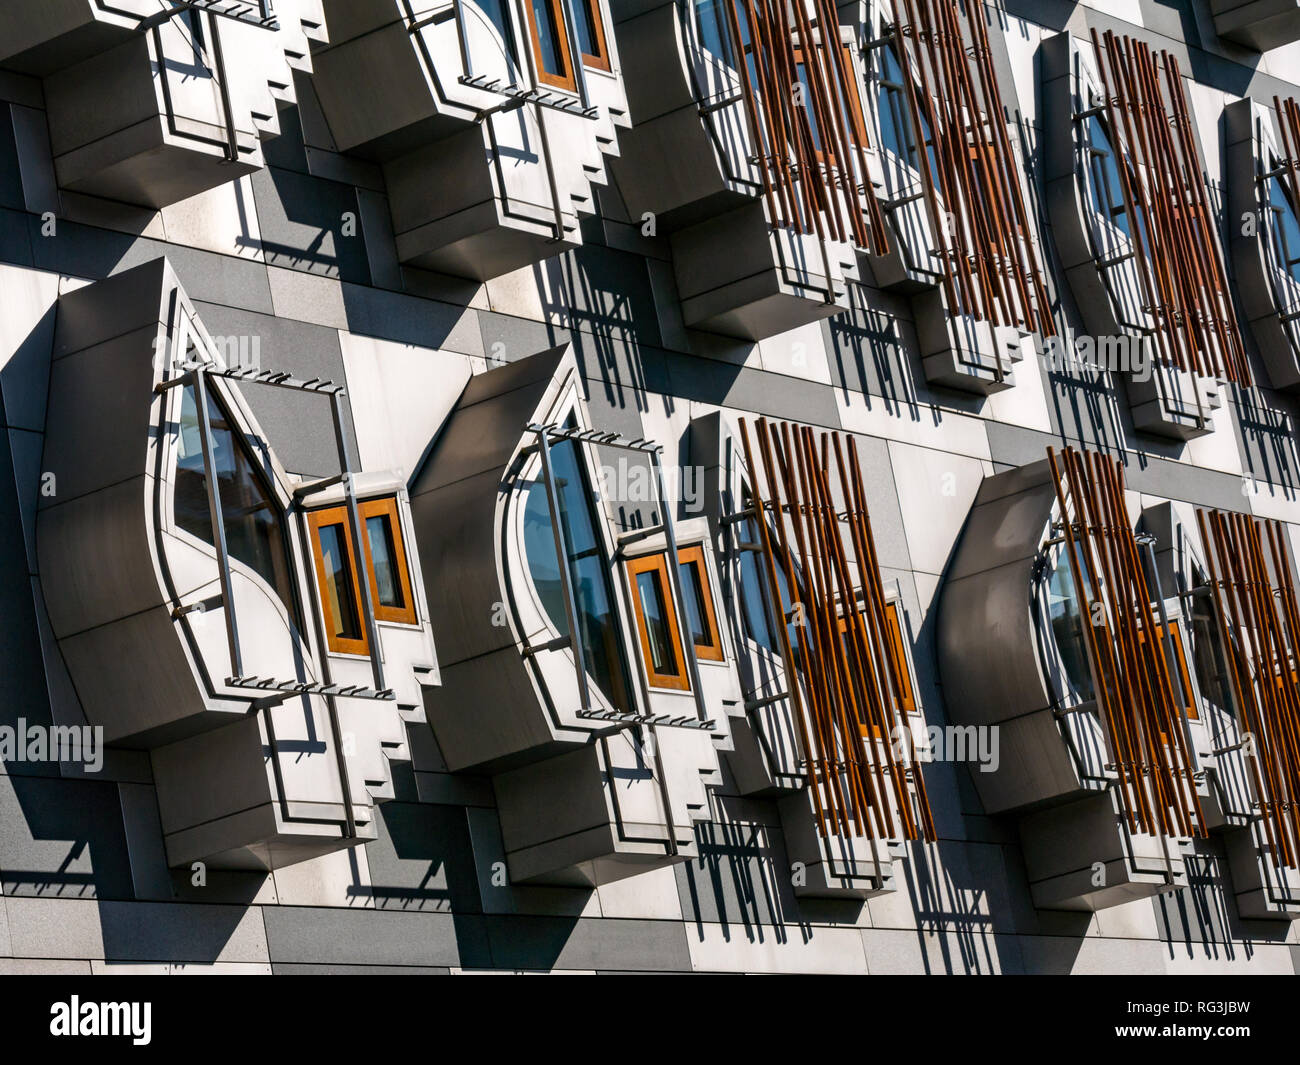 Quirky windows, thinking pods or contemplation spaces, Scottish Parliament building designed by Catalan architect Enric Miralles, Edinburgh, Scotland Stock Photo